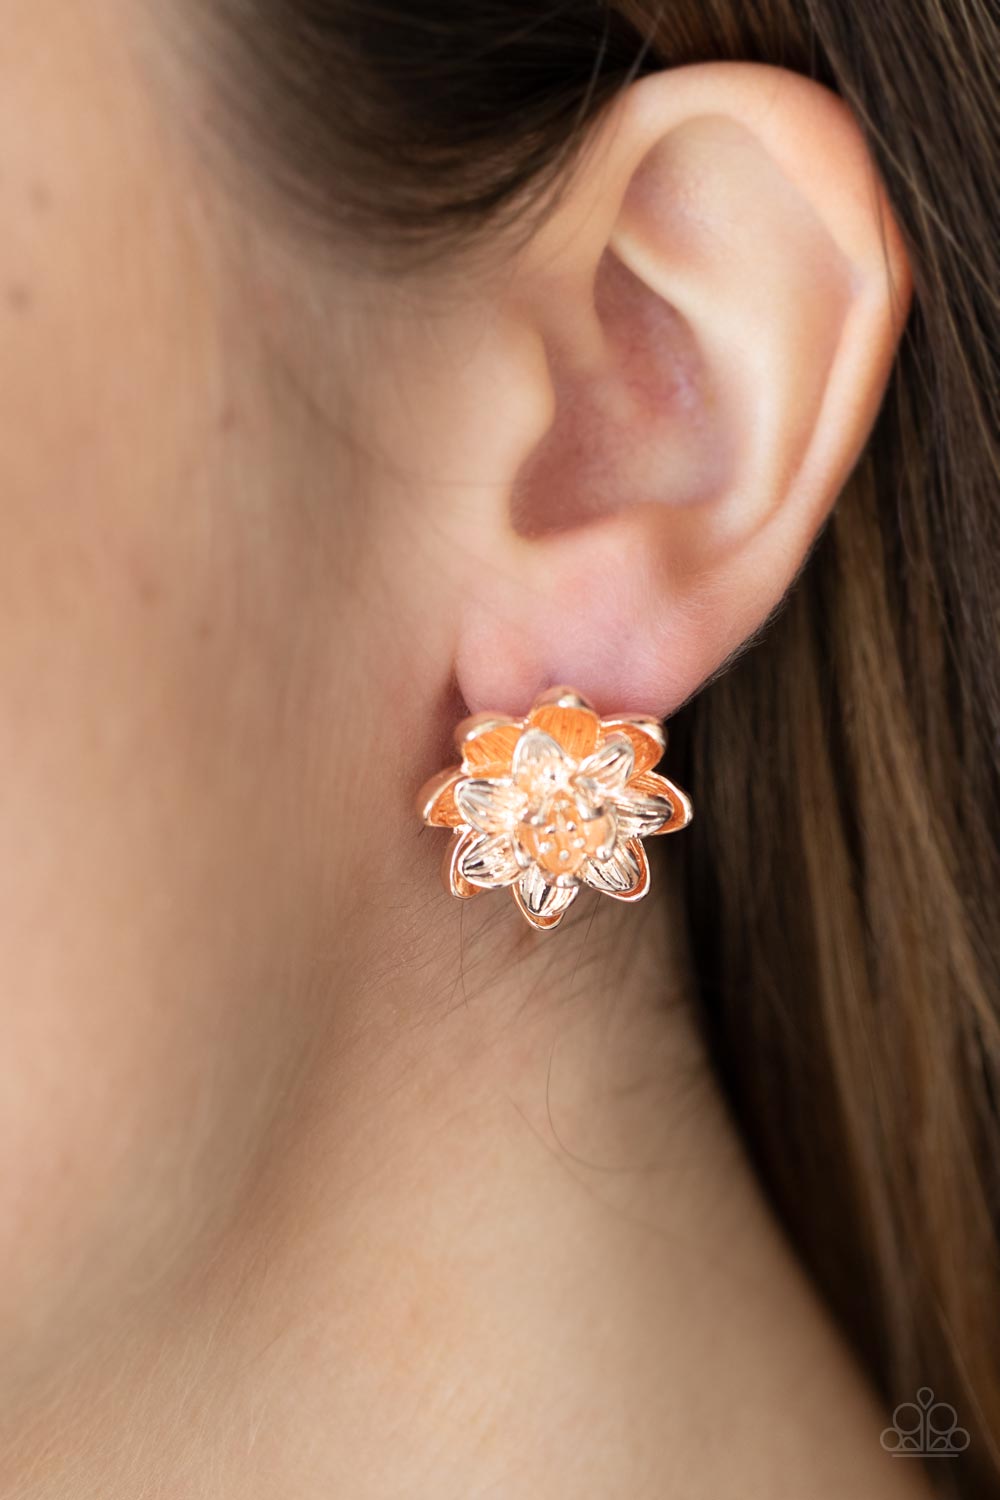 Paparazzi Water Lily Love Rose Gold Post Earrings